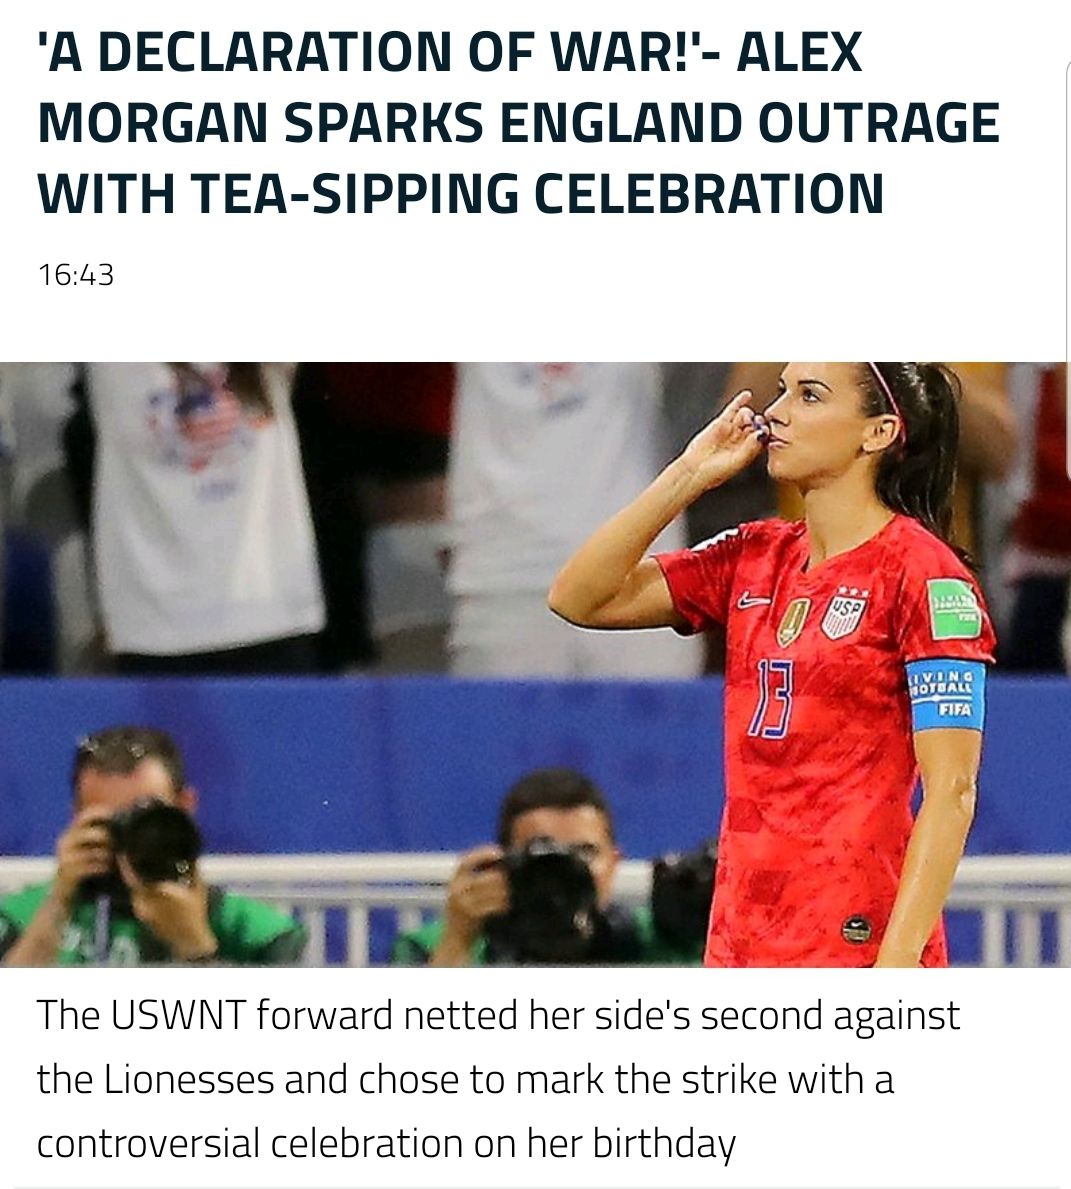 USWNT star Alex Morgan declares war against the British as she "sips tea" after scoring goal that sends England home, and USA to the world cup finals